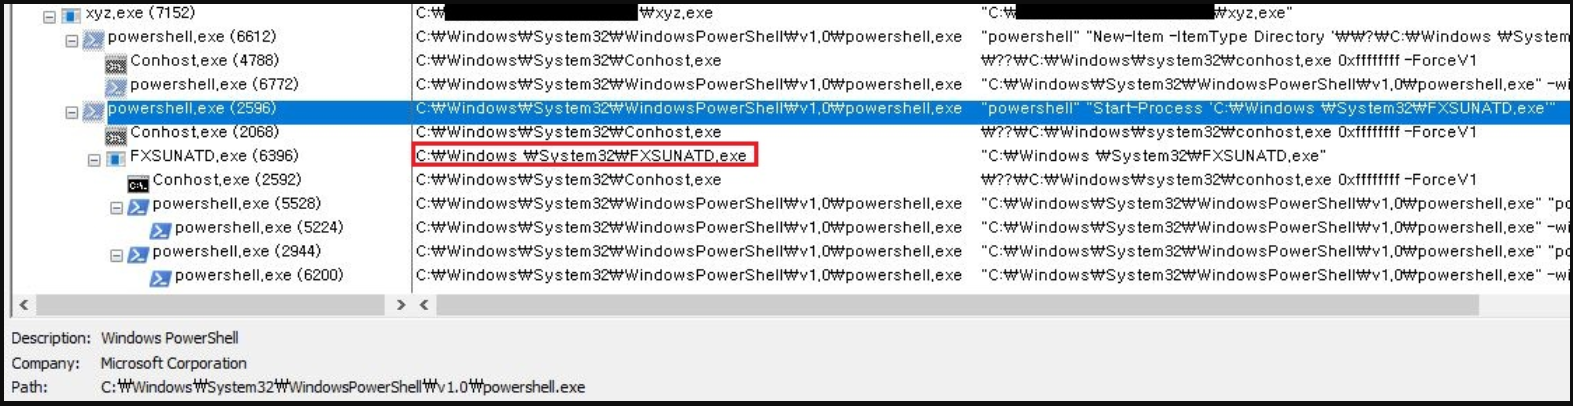 PowerShell exclusions and the auto-elevate